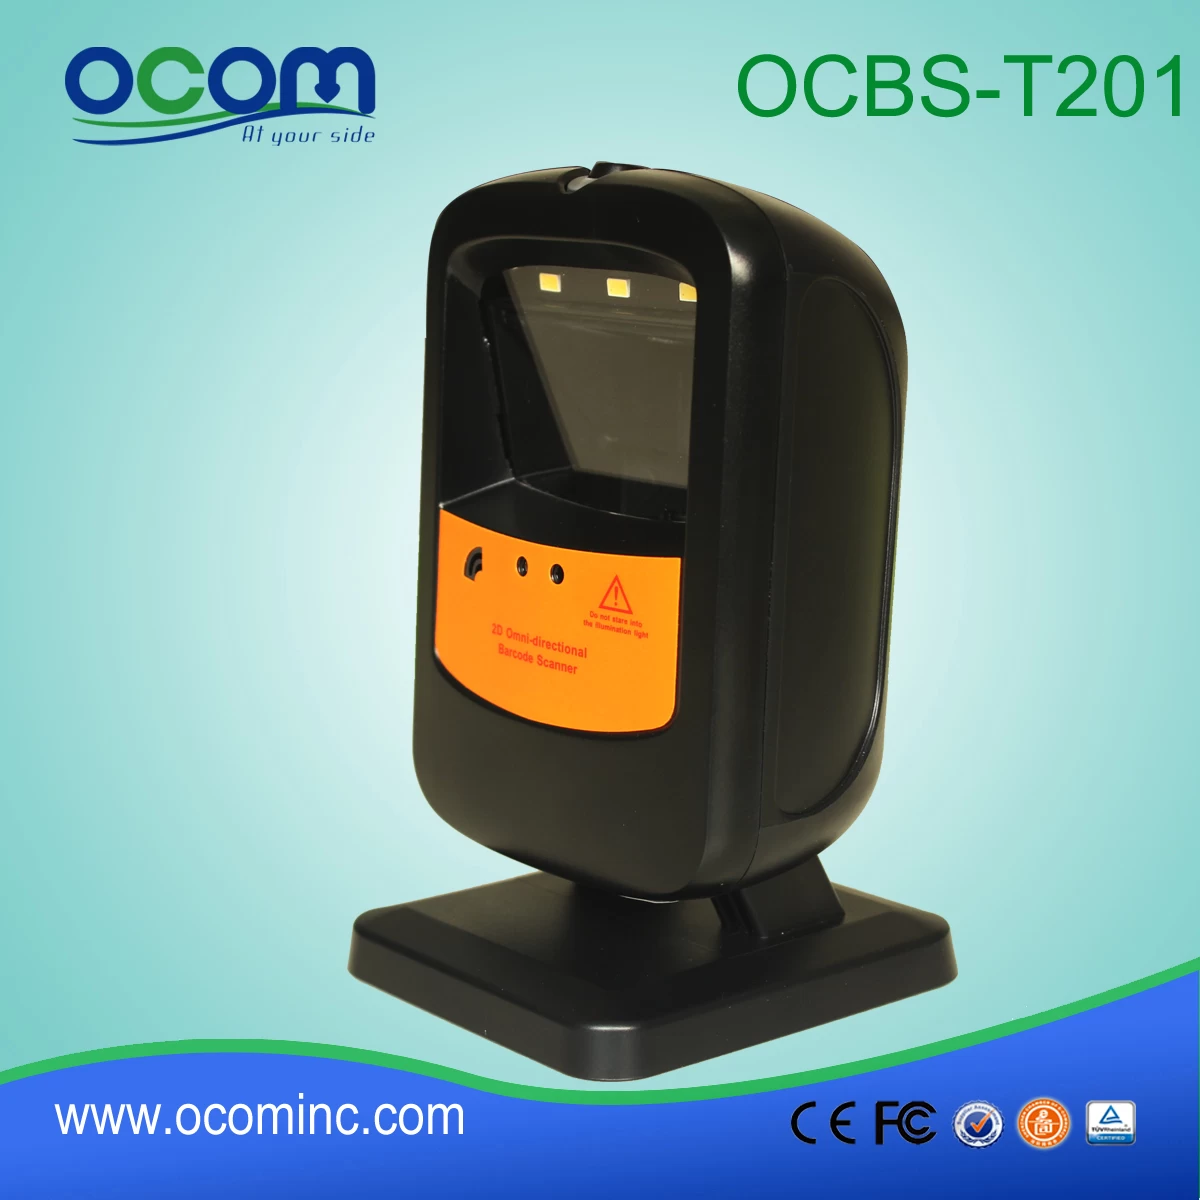 new omni directional 2d codes barcode scanner OCBS-T201